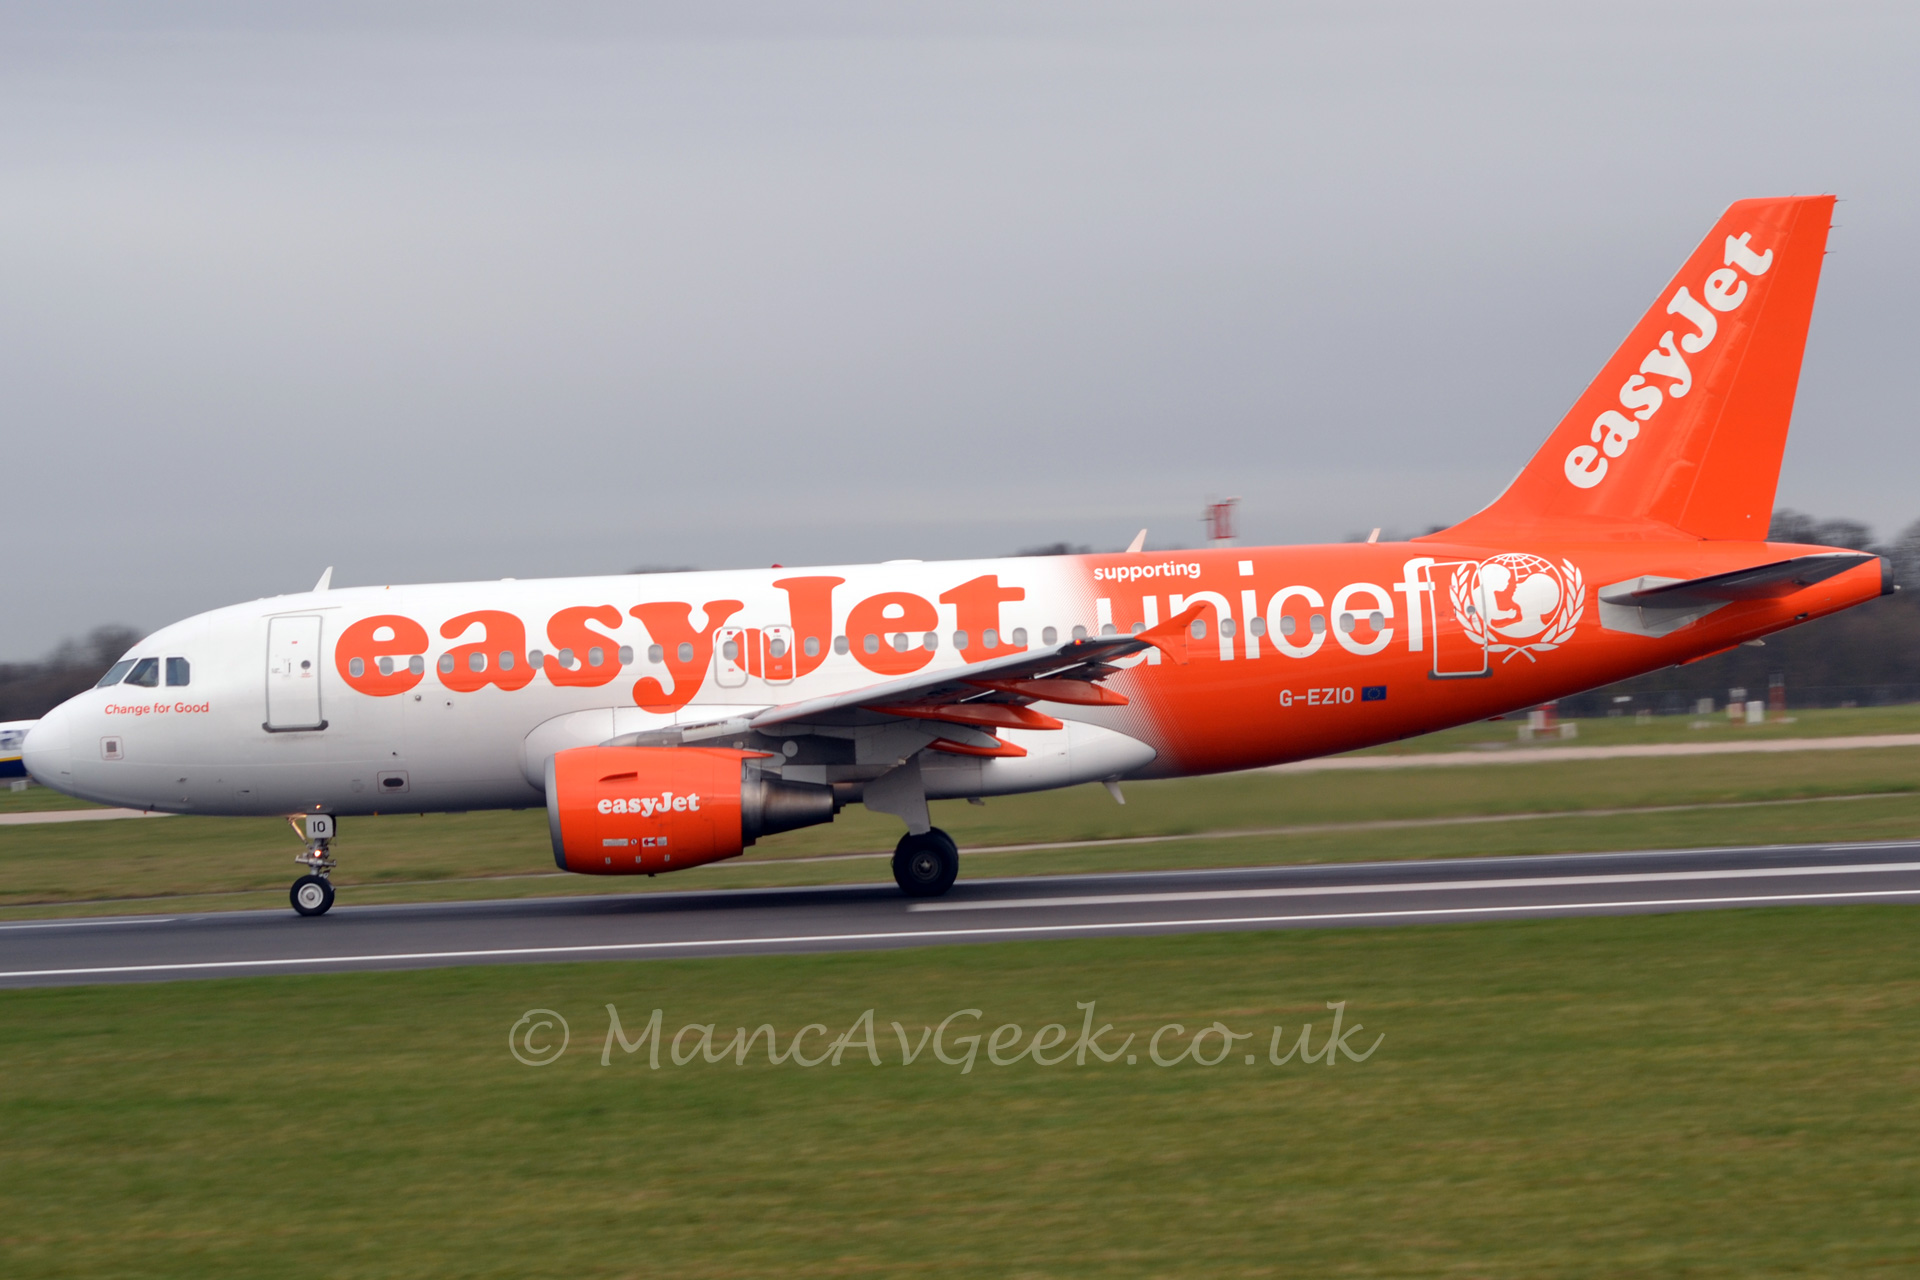 Side view of a twin engined jet airliner accelerating along a runway on it's take-off run. The plane is mostly white, with large orange "easyJet" billboard style titles on the forward fuselage, with smaller orange "Change for Good" titles under the cockpit windows. The rear fuselage is almost entirely orange, with large "supporting Unicef" titles and the unicef logos (an image of a wireframe globe overlaid with an image of the heads of an adult and a child, surrounded by a laurel wreath). The tail and engines are also orange, with white "easyJet" titles. The foreground is mostly grass, while the background is mostly grass below the plane, with some trees visible above the nose and under the tail. Above, the sky is an ominous grey.